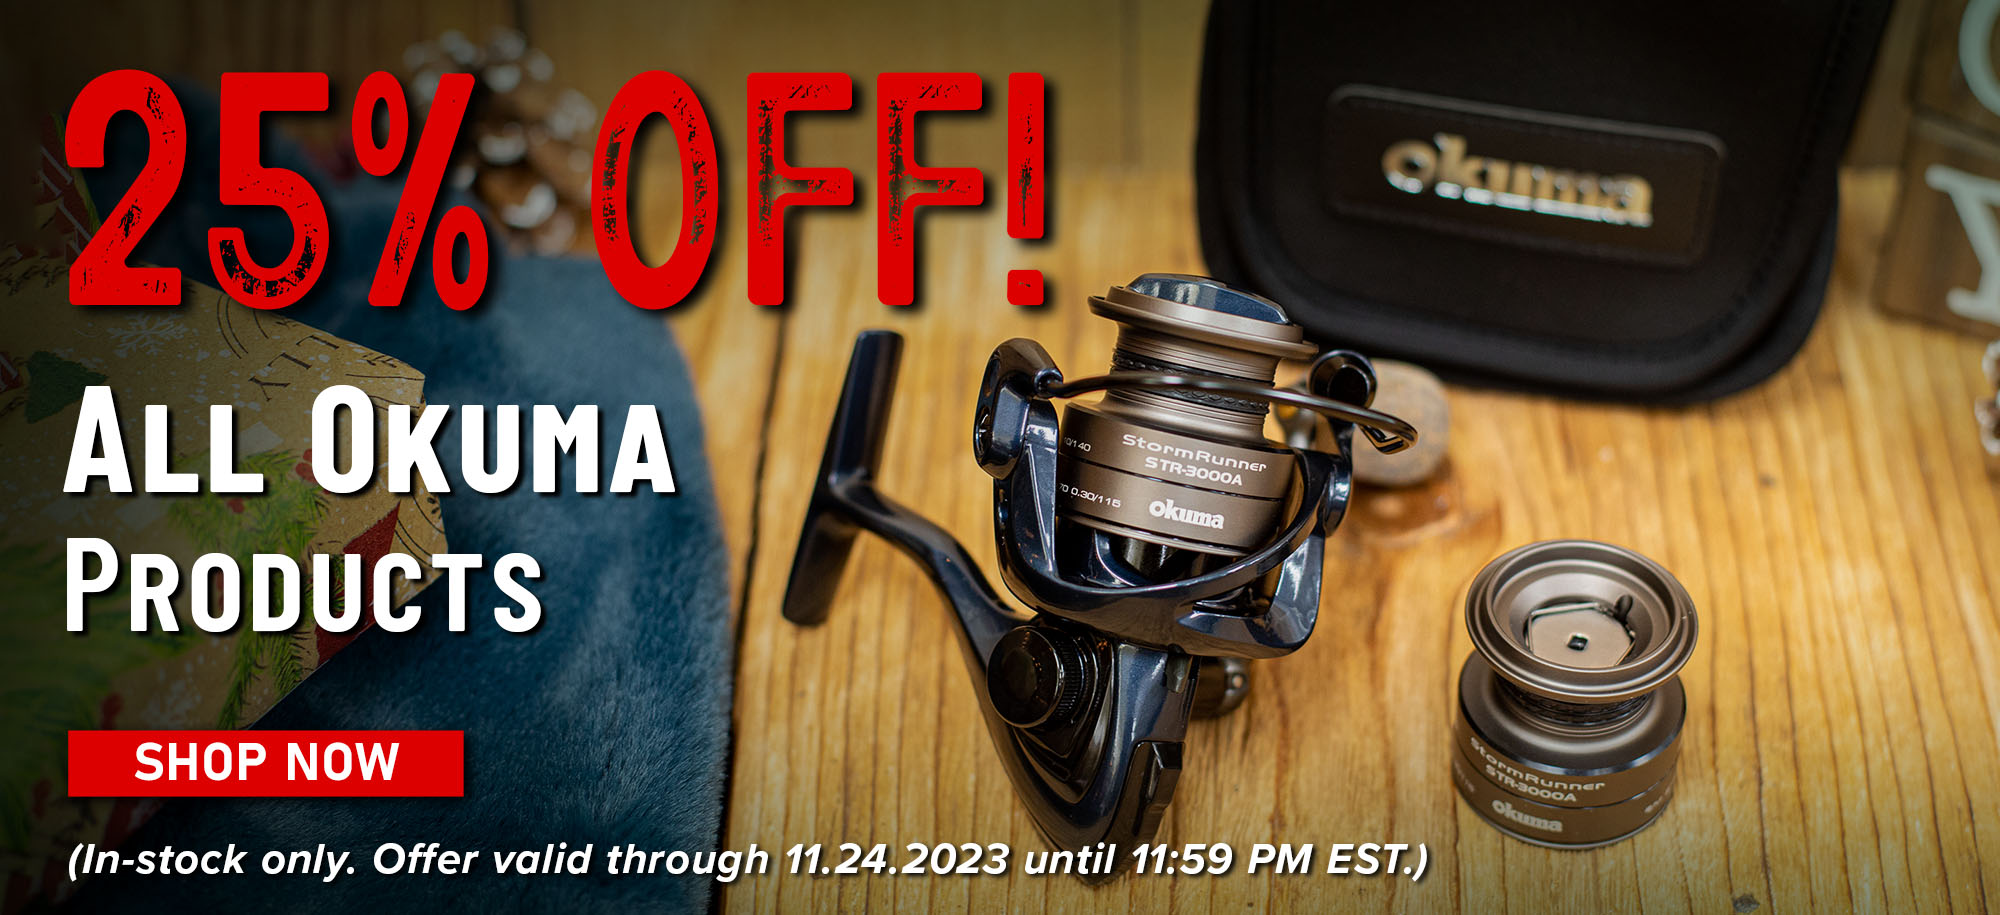 25% Off! All Okuma Products Shop Now (In-stock only. Offer vald through 11.24.2023 until 11:59 PM EST.)